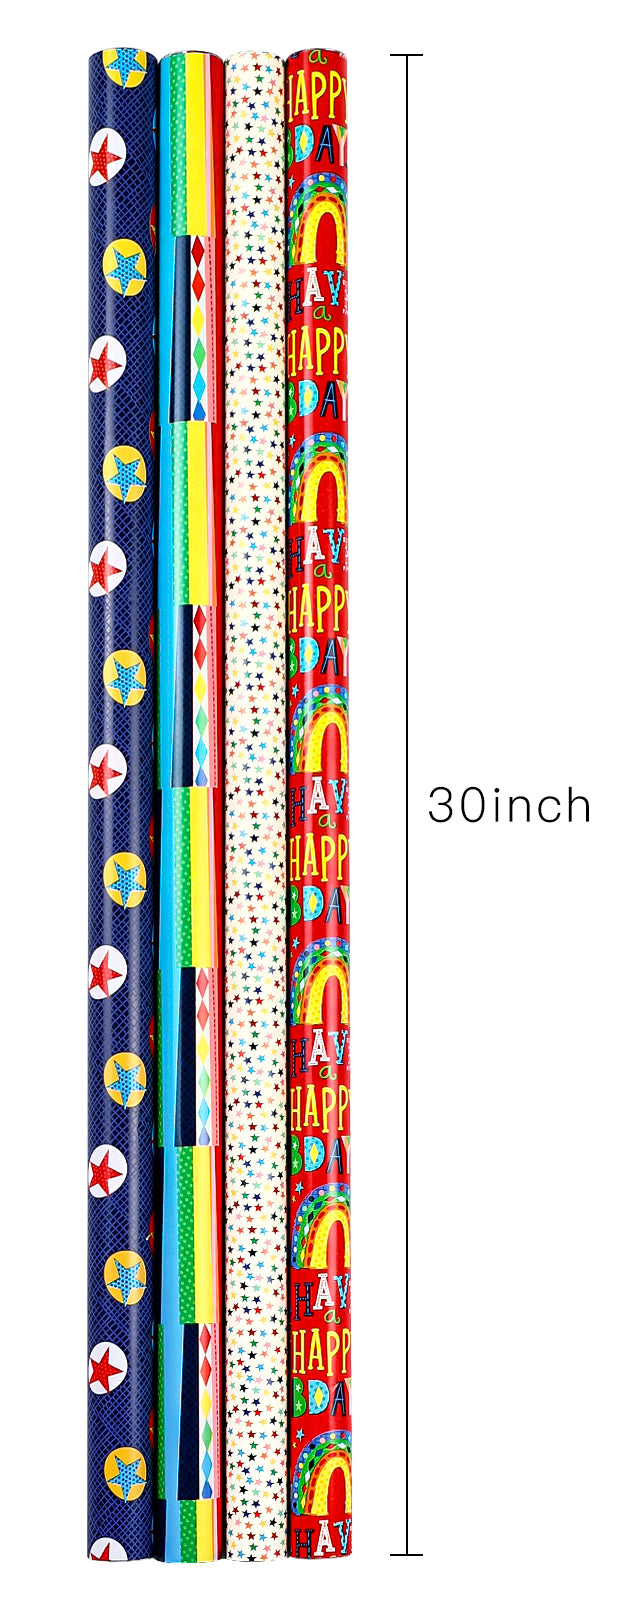 All Occasions Wrapping Paper Rolls, 6 Pack - Wrapping Paper | Hallmark